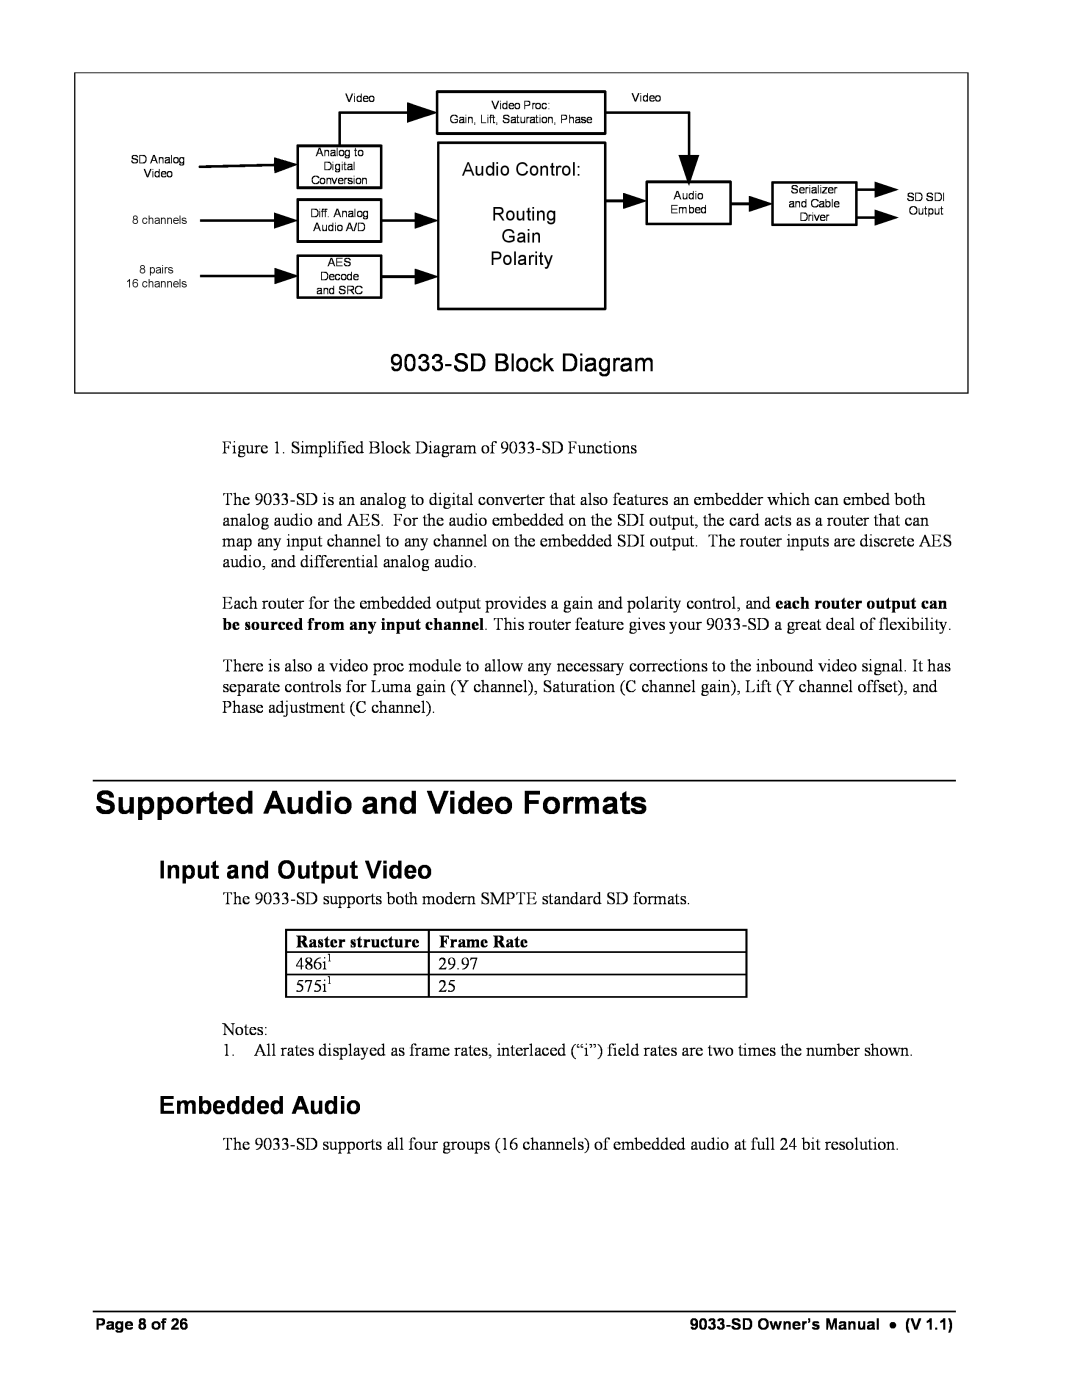 Cobalt Networks 9033-SD Supported Audio and Video Formats, Input and Output Video, Embedded Audio, SD Block Diagram, Gain 